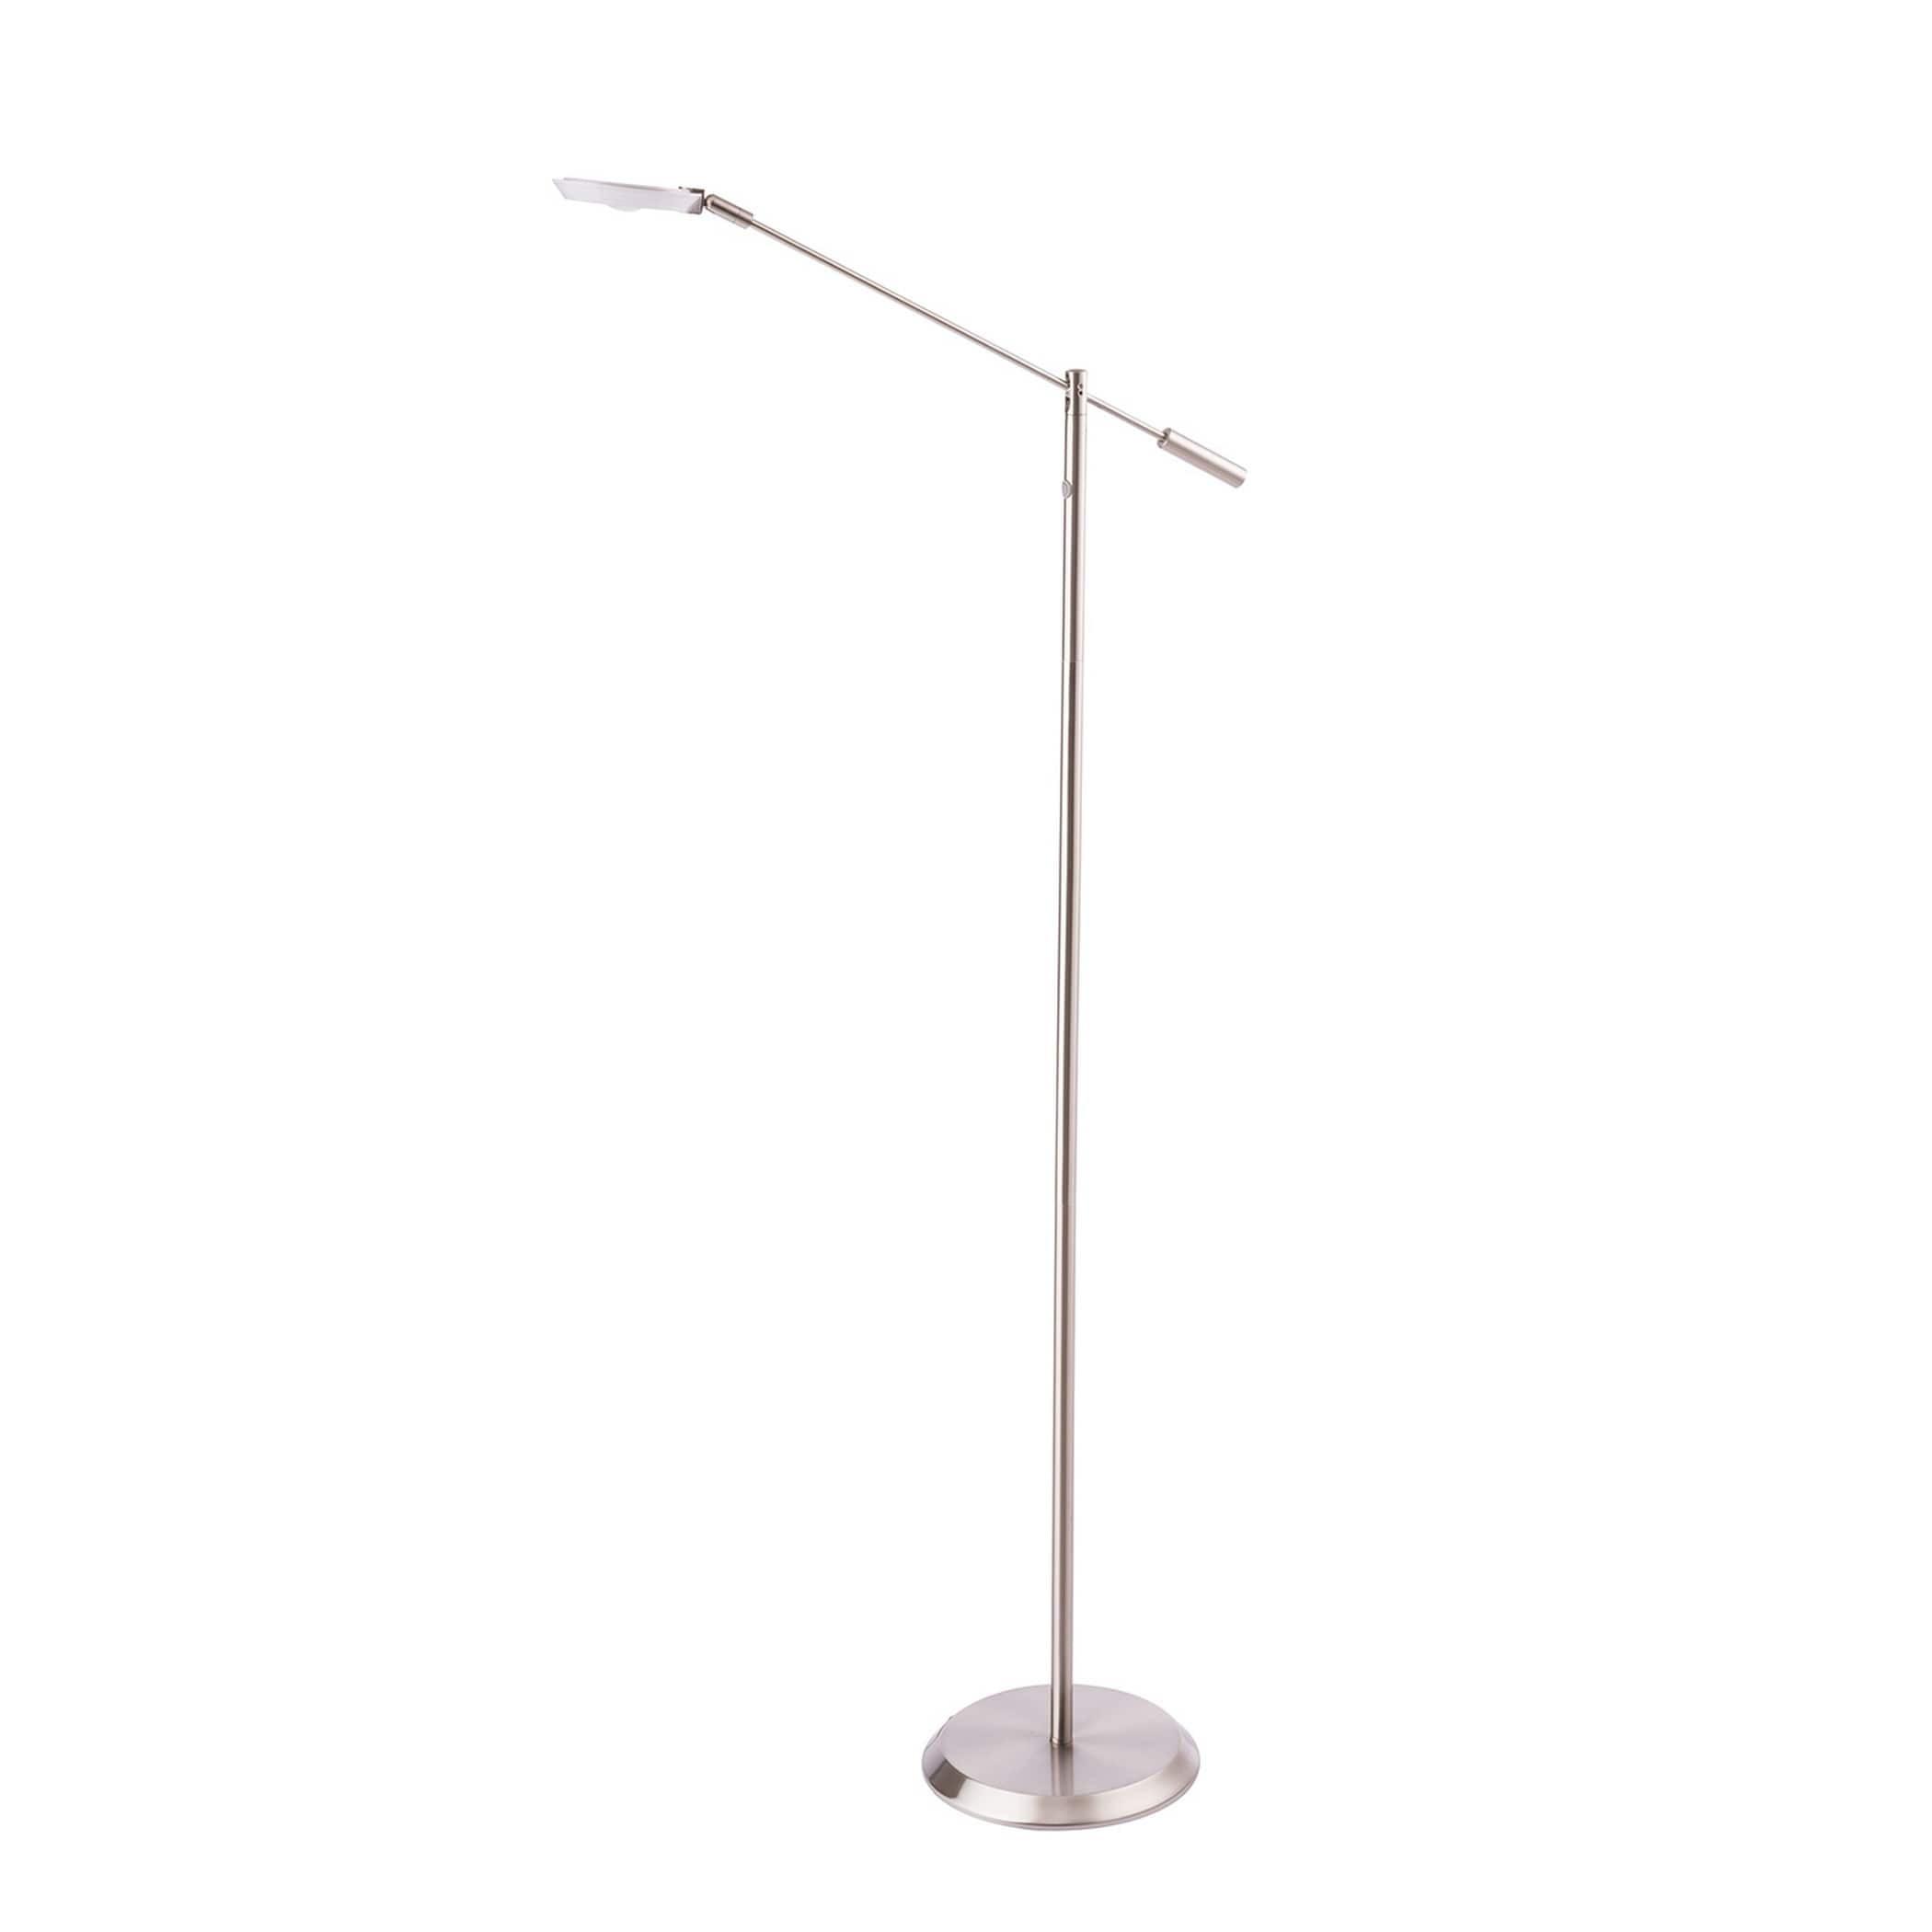 Adjustable Satin Nickel LED Floor Lamp with Memory Dimmer